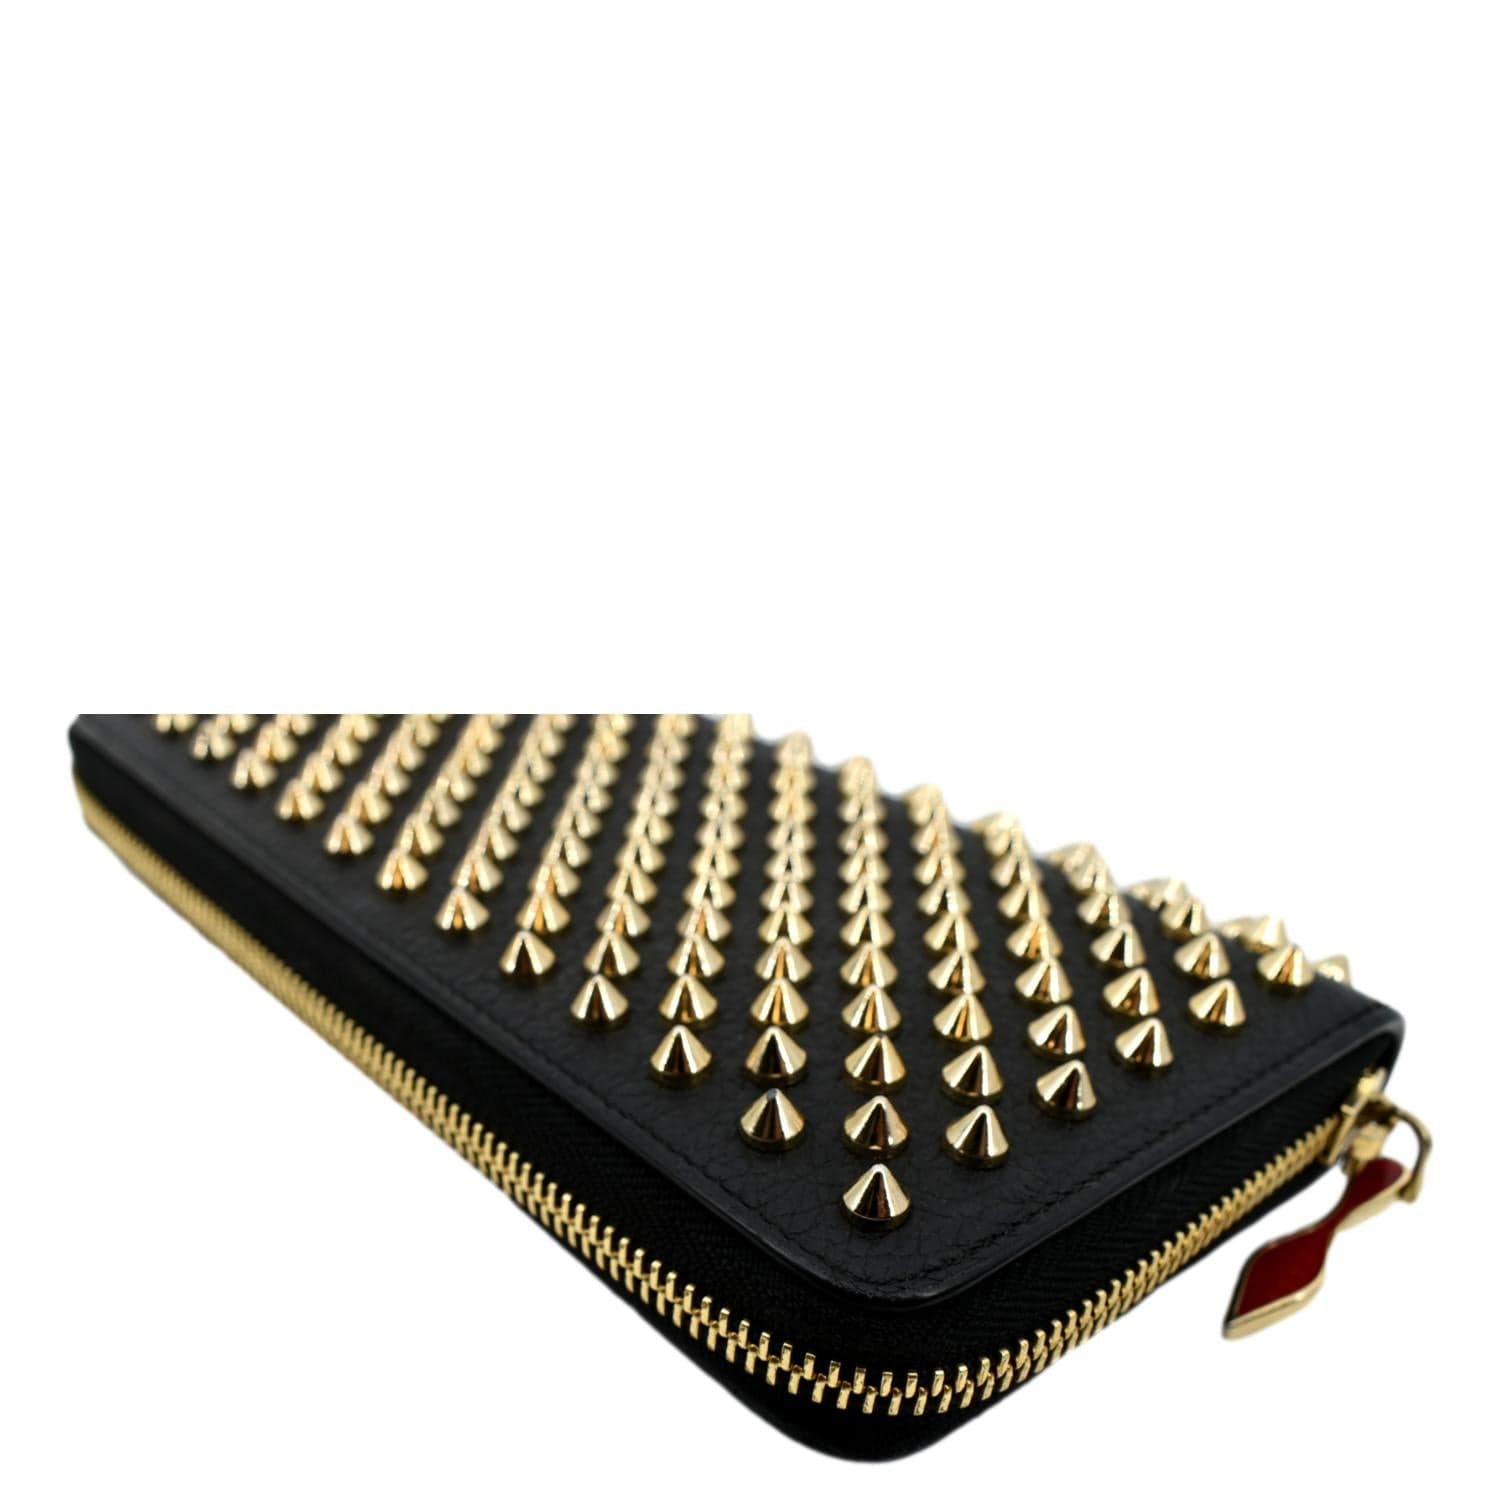  Christian Louboutin Panettone Black Spiked Leather Wallet :  Clothing, Shoes & Jewelry